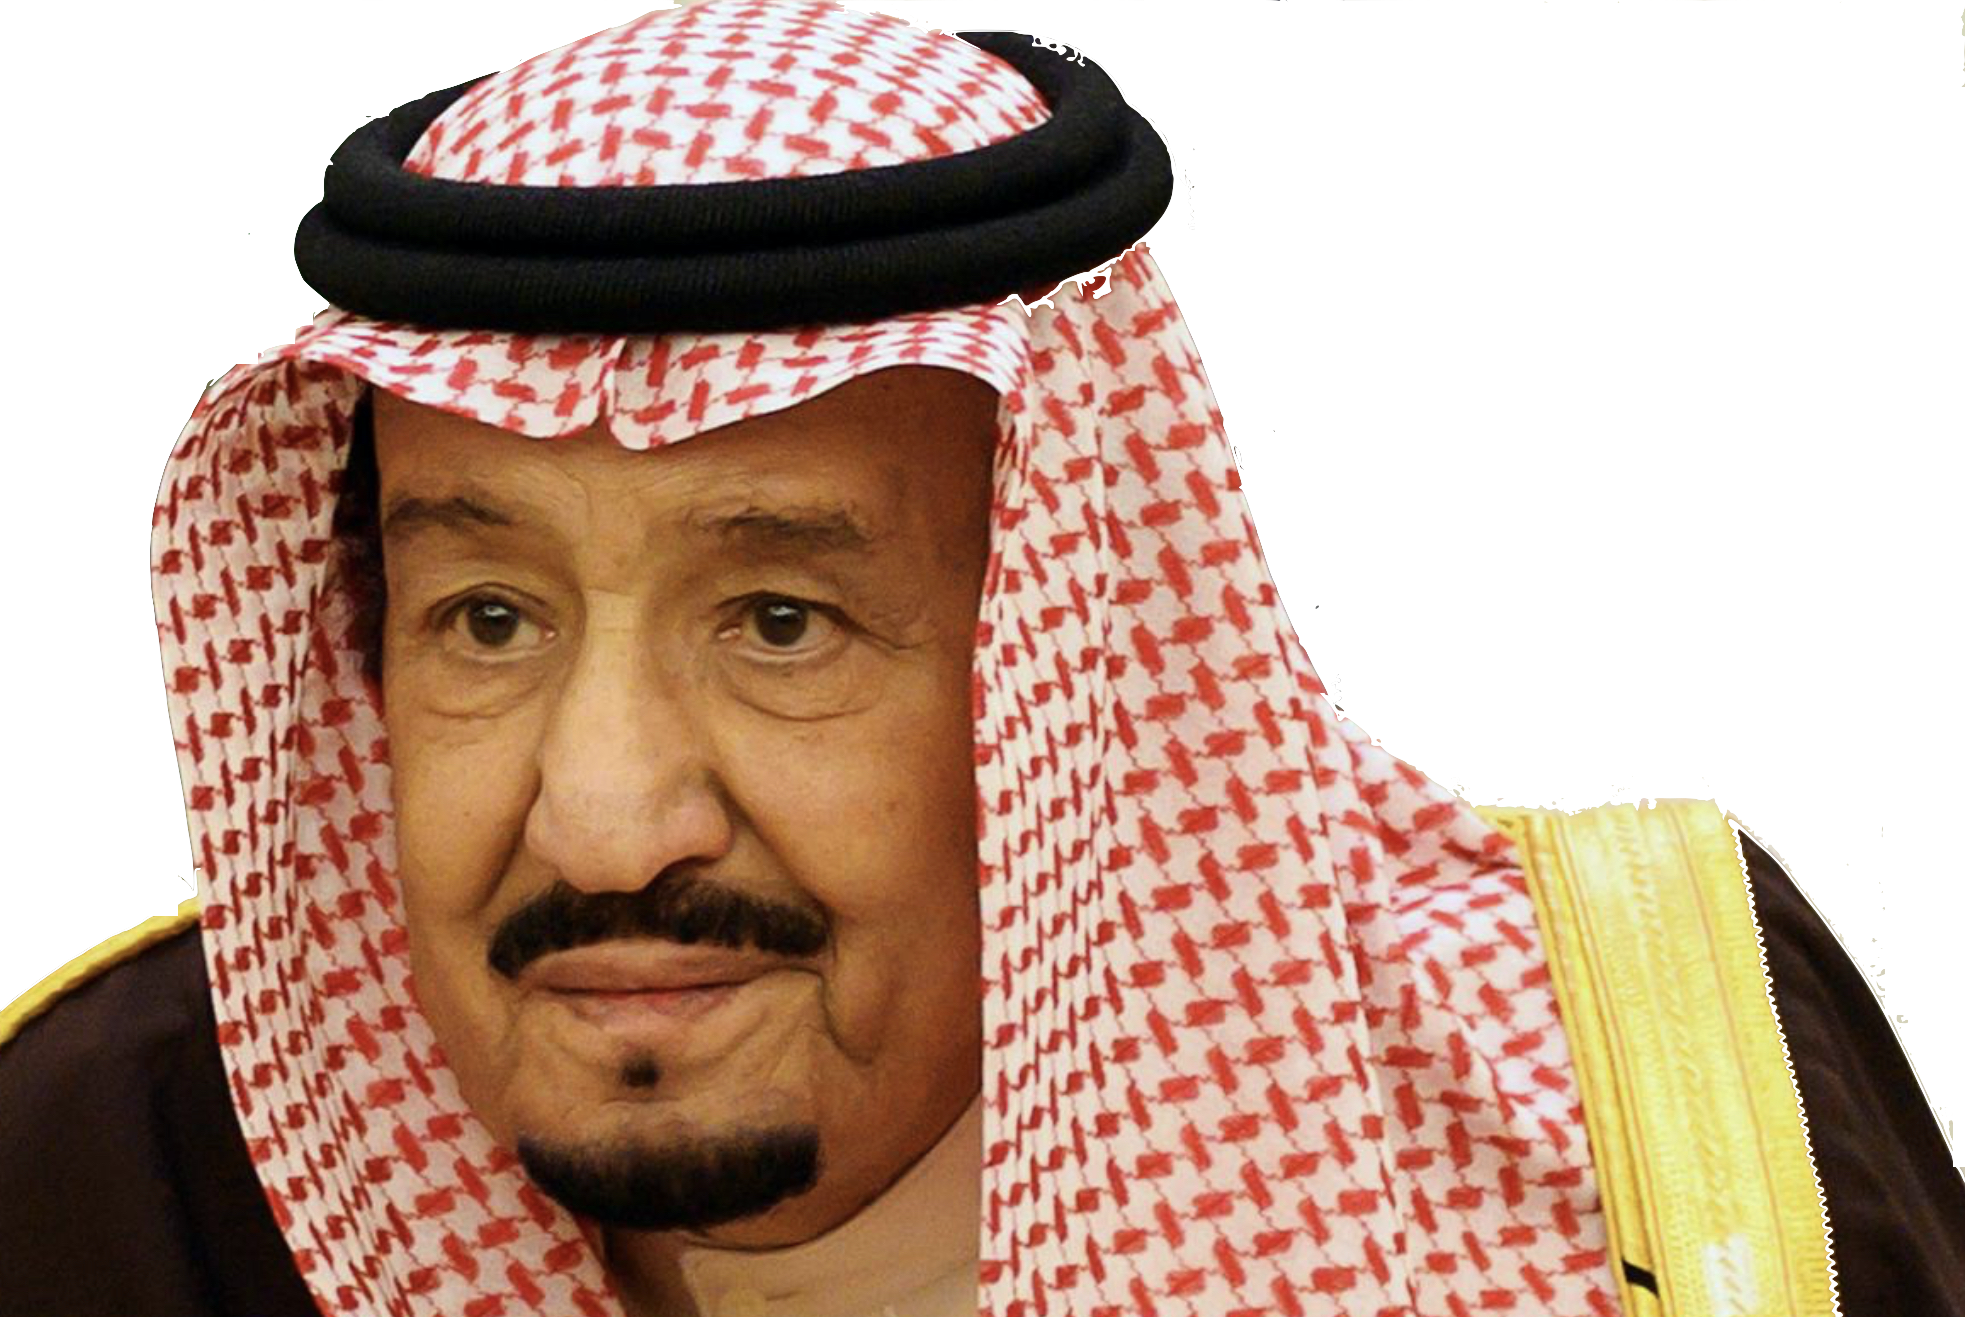 On the eve of Eid Al-Fitr, King Salman greets people locals and Muslims all over the world